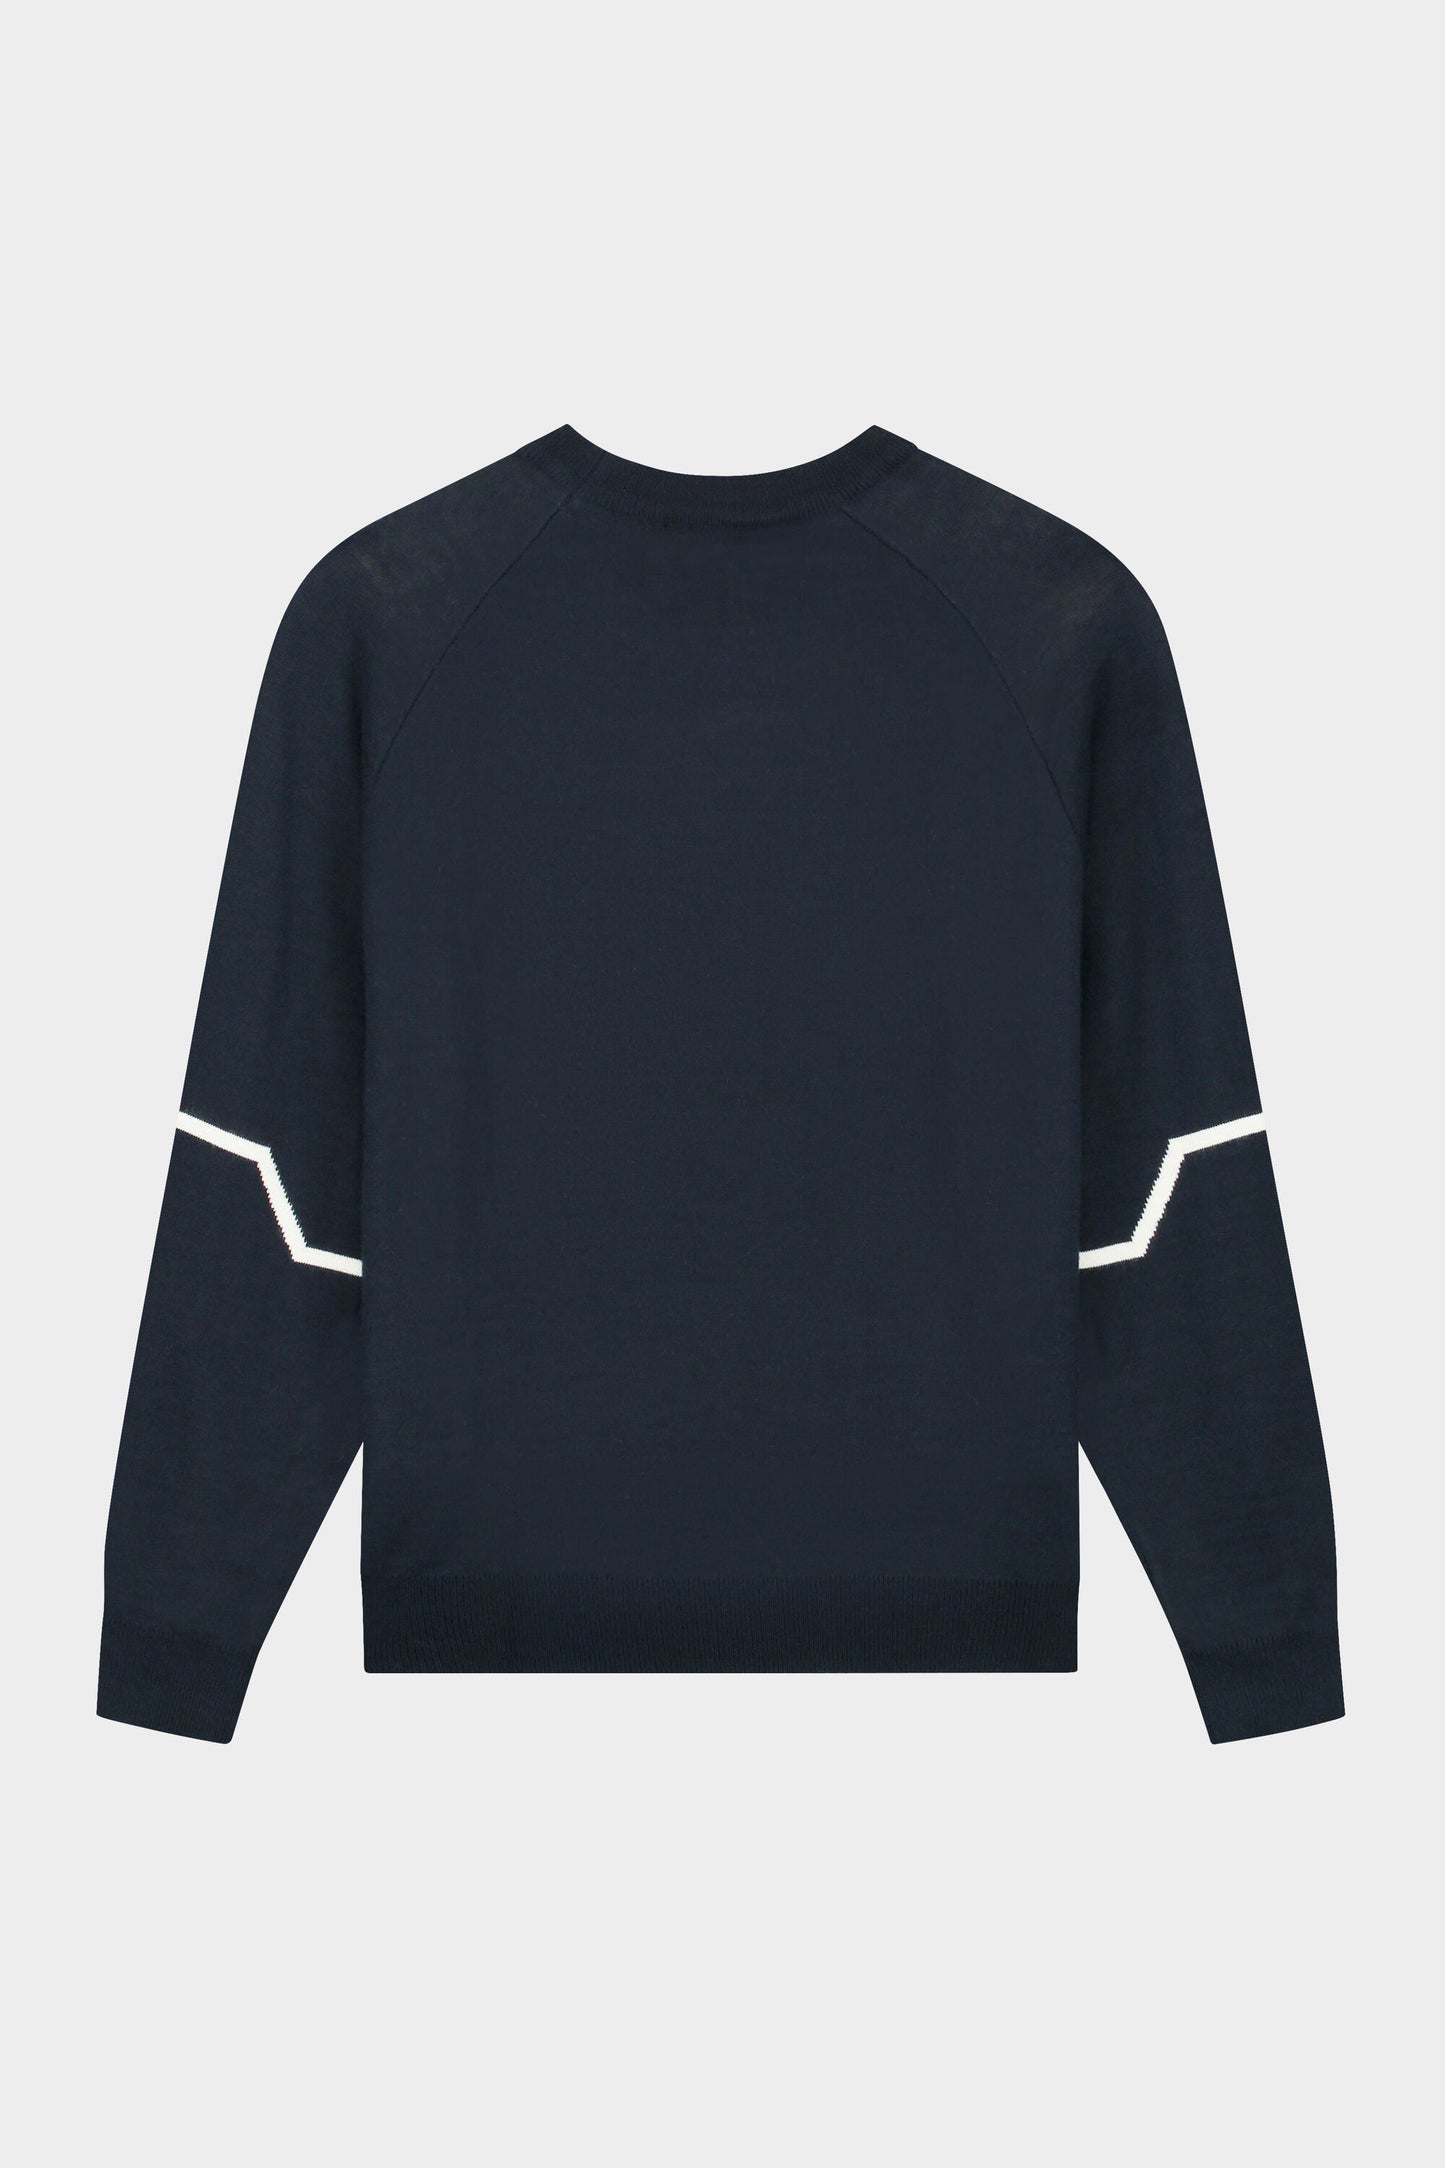 Striped Knitted Hexagon Crew Neck Sweater Navy Blue